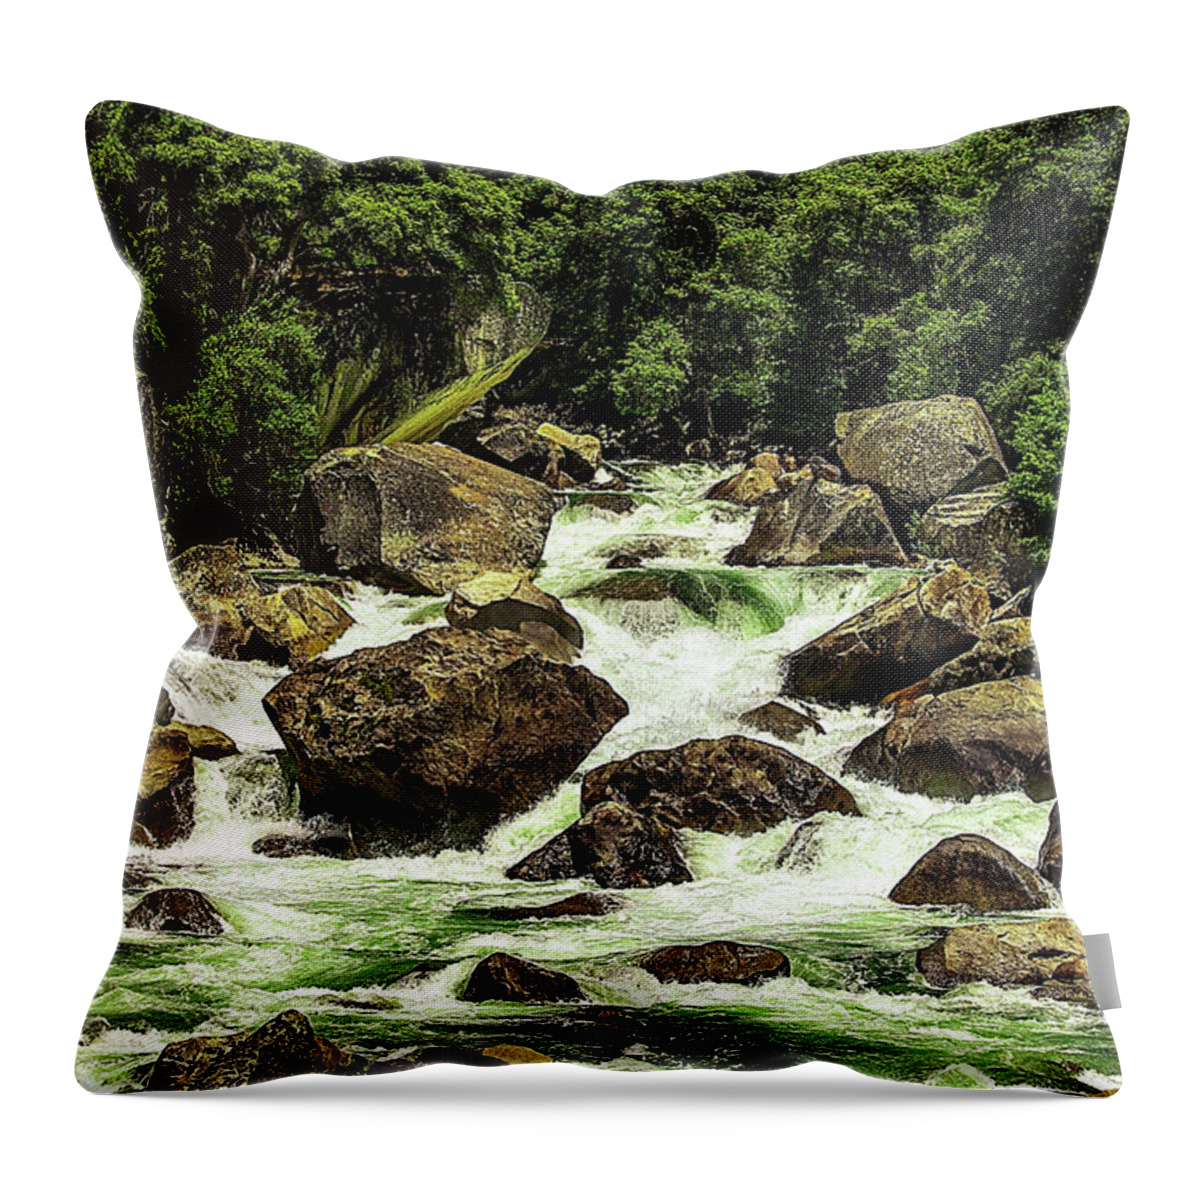 Merced River Throw Pillow featuring the photograph Merced River Rapids by Bill Gallagher